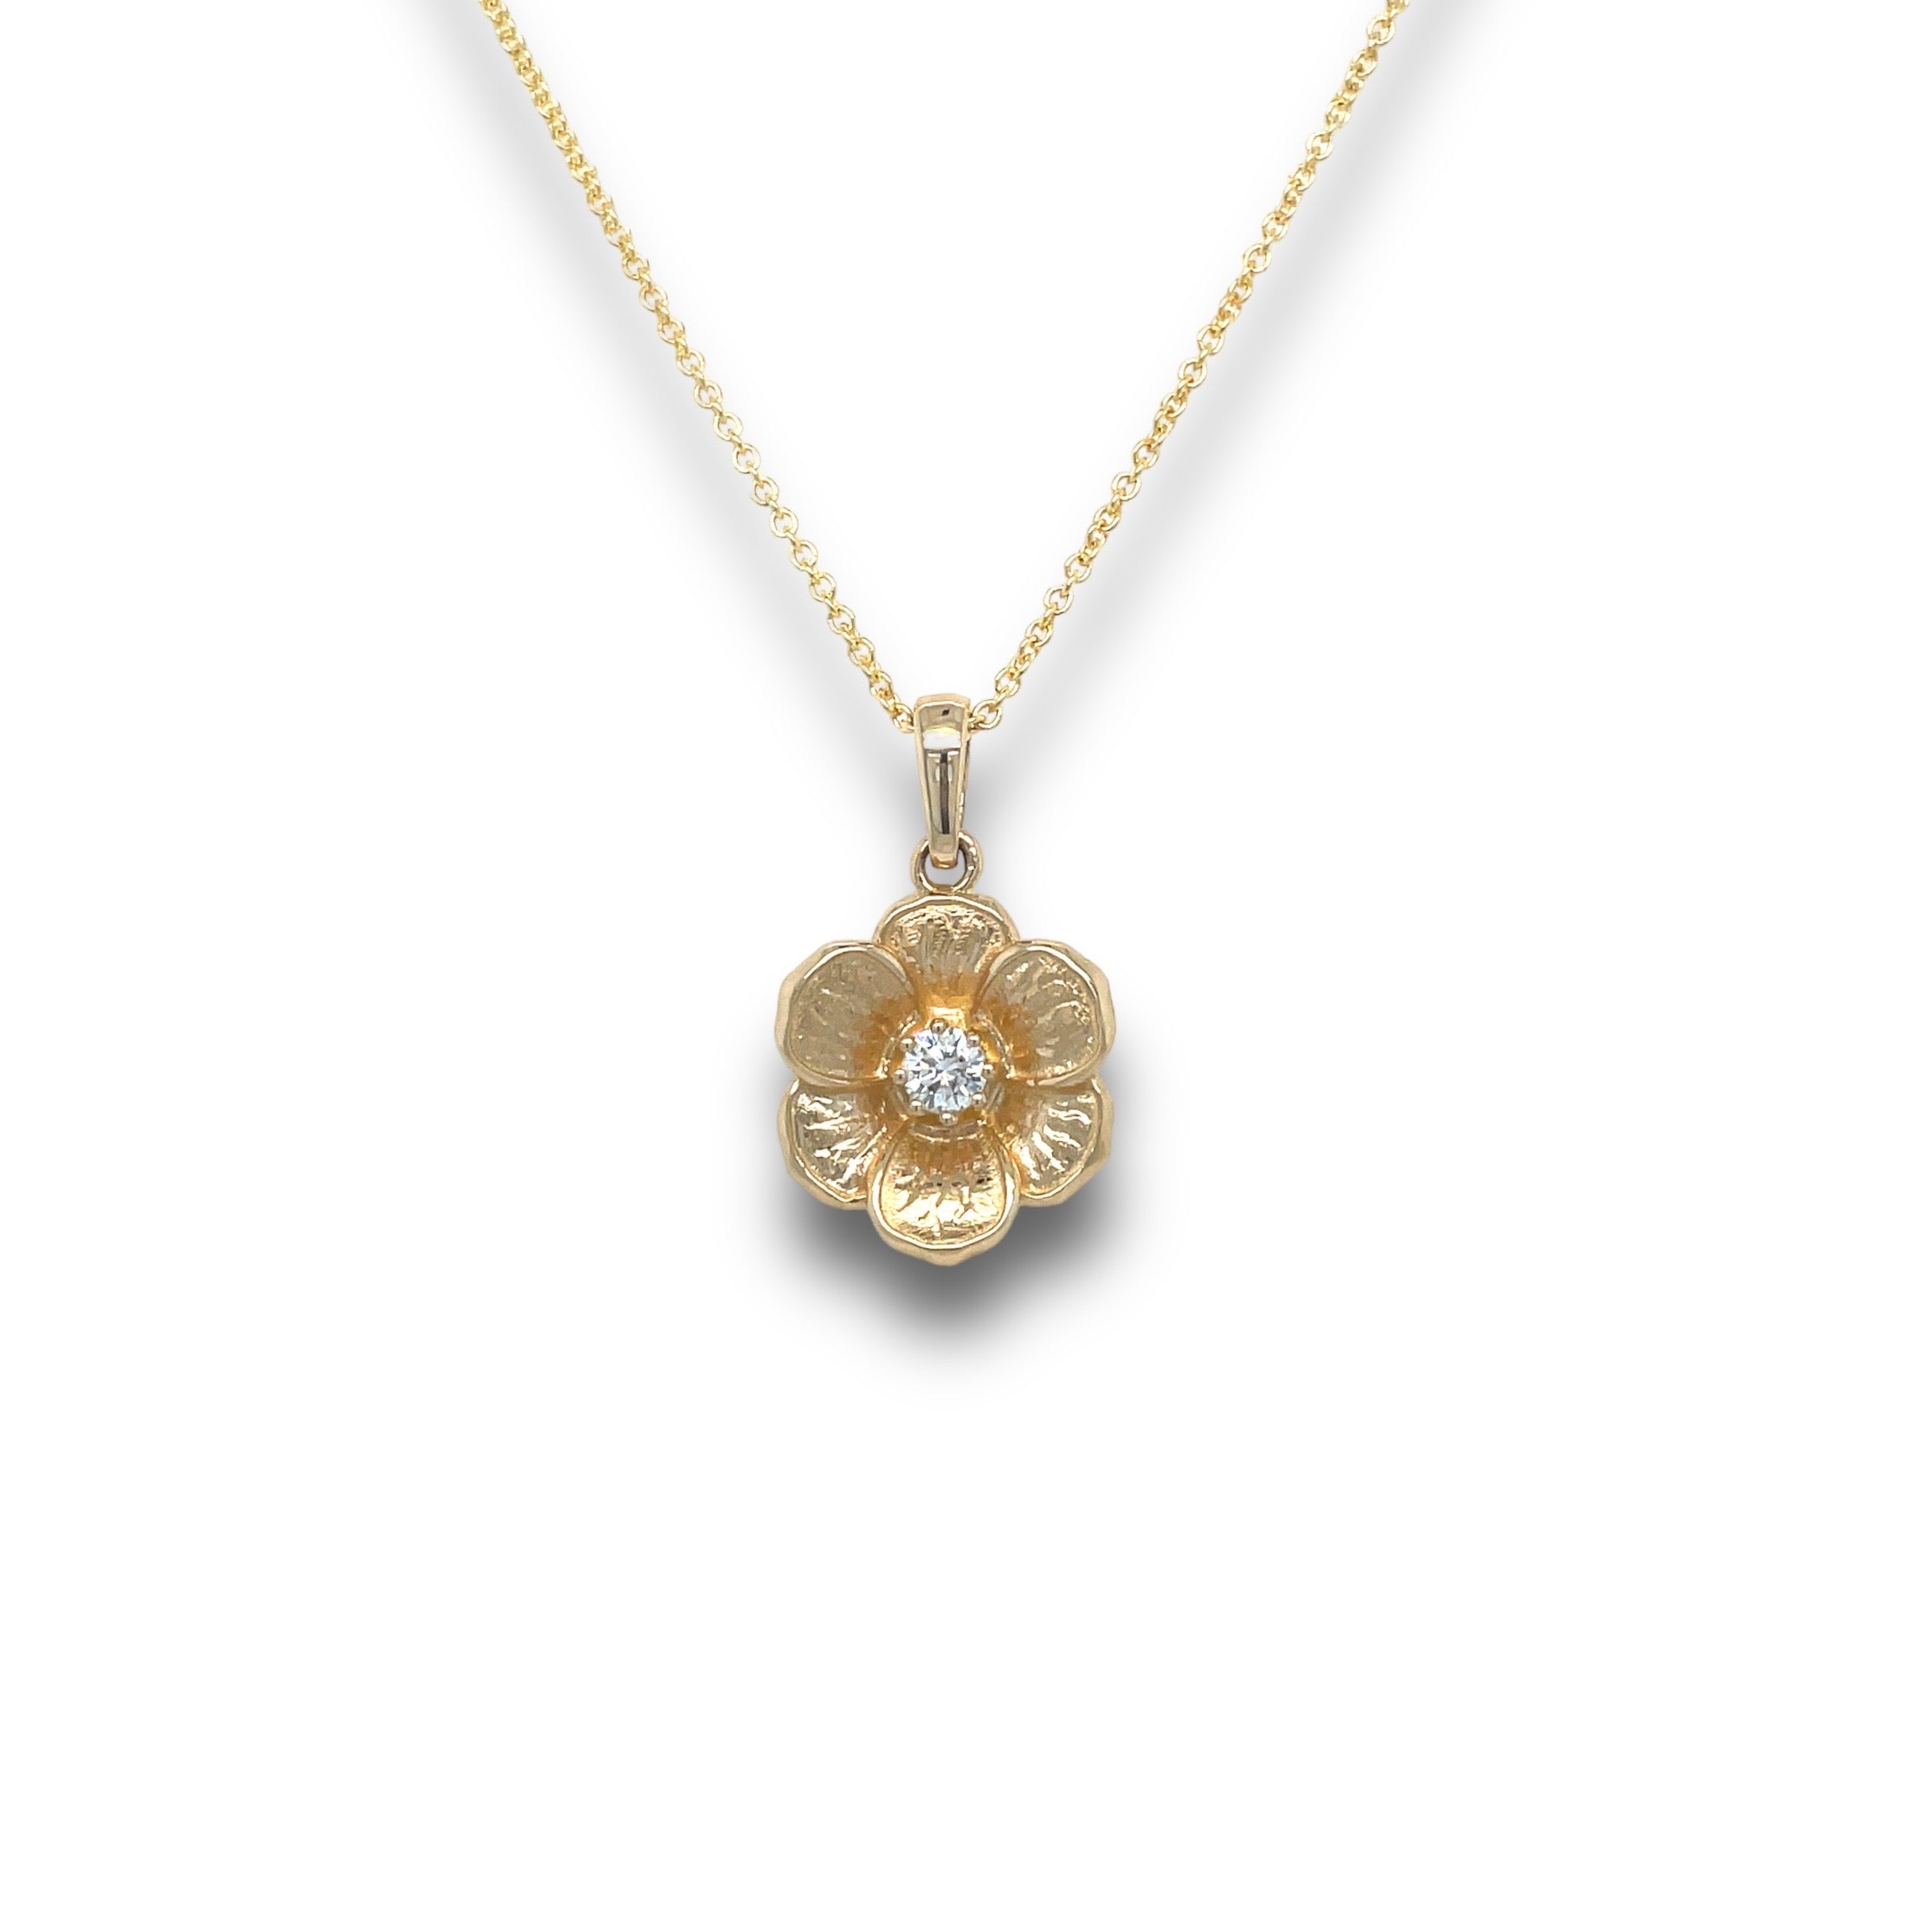 Florentina Diamond Necklace in Yellow Gold